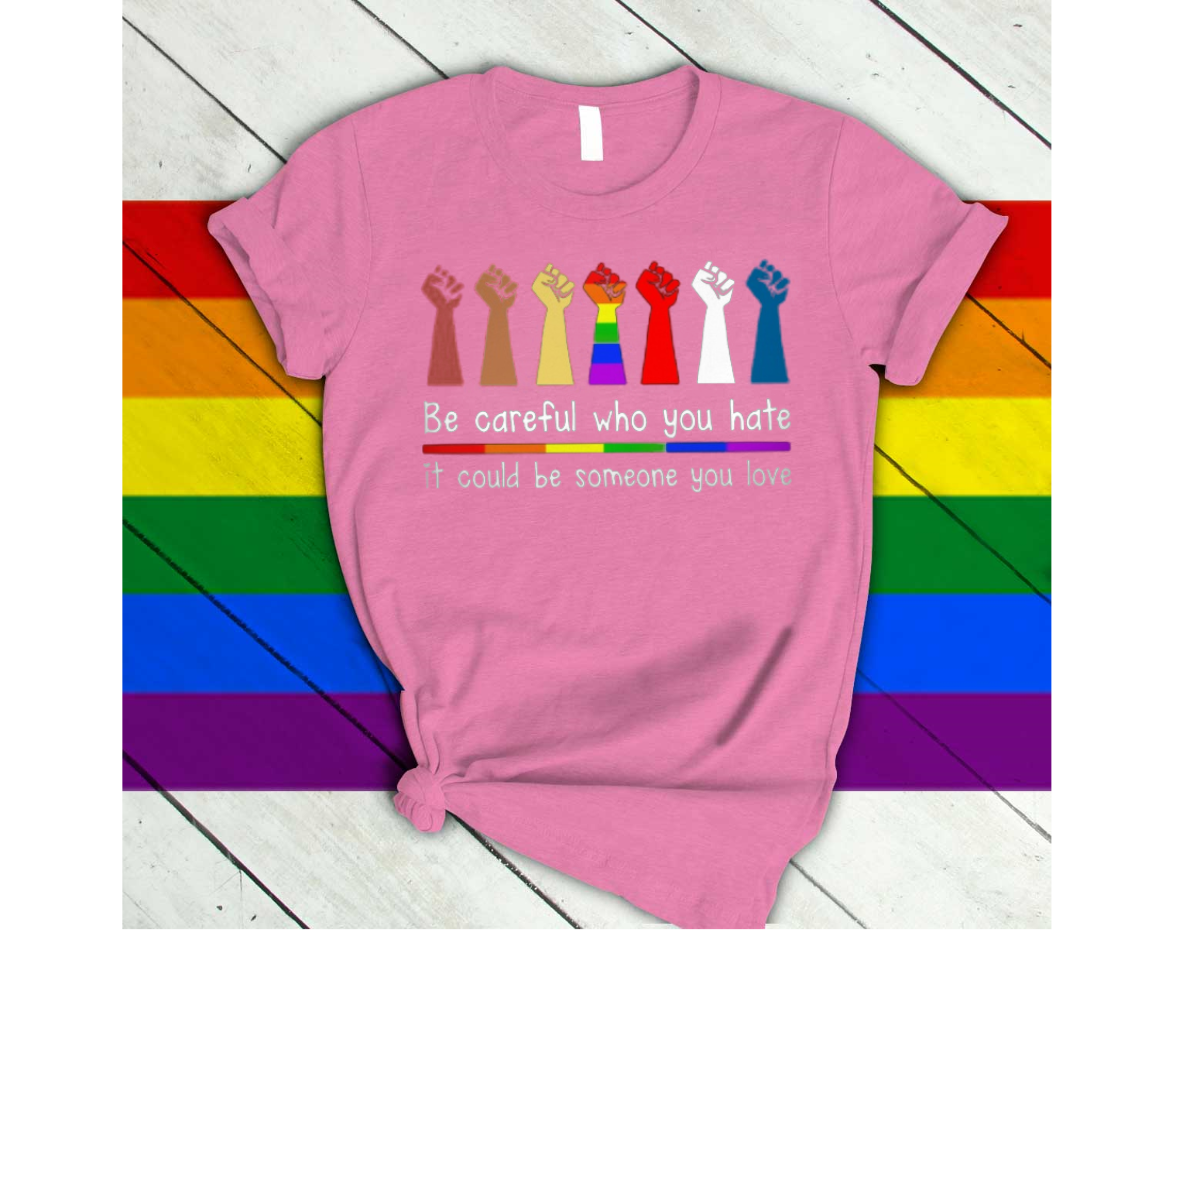 Rainbow Shirt Be Careful Who You Hate It Could Be Some One You Love/ Gay Pride T Shirts